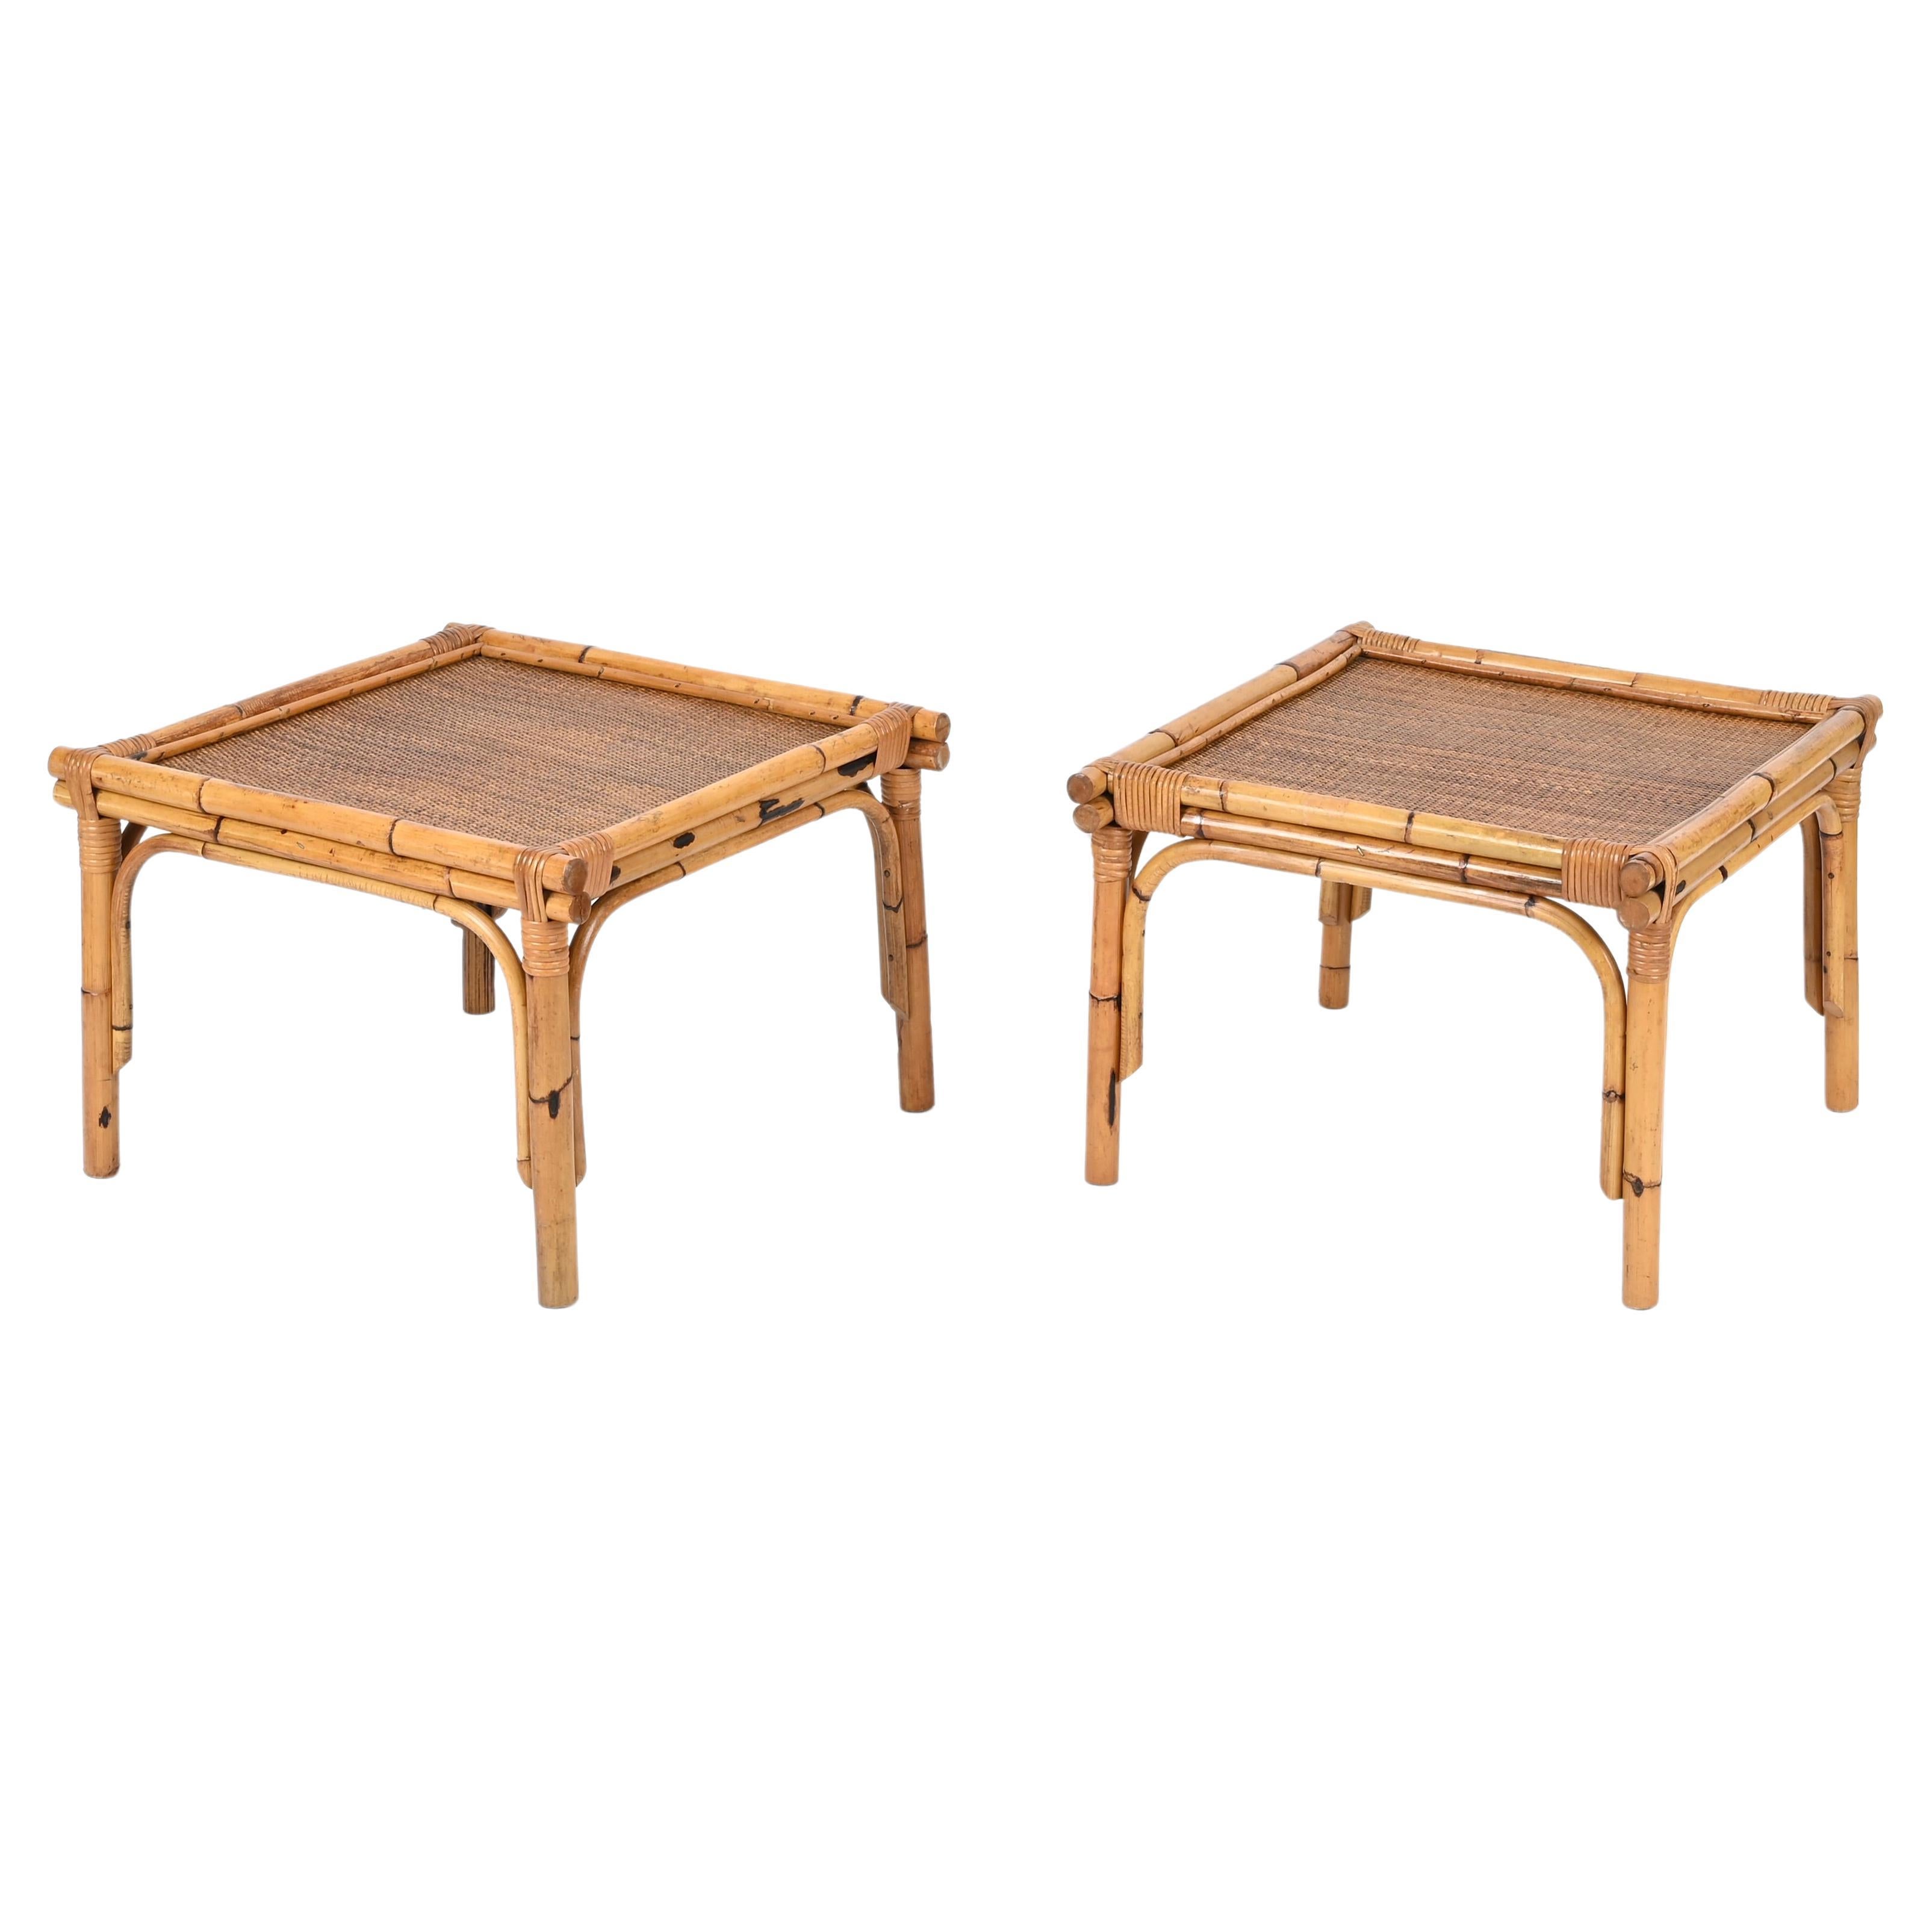 Pair of French Riviera Square Coffee Table in Rattan and Wicker, Italy 1970s For Sale